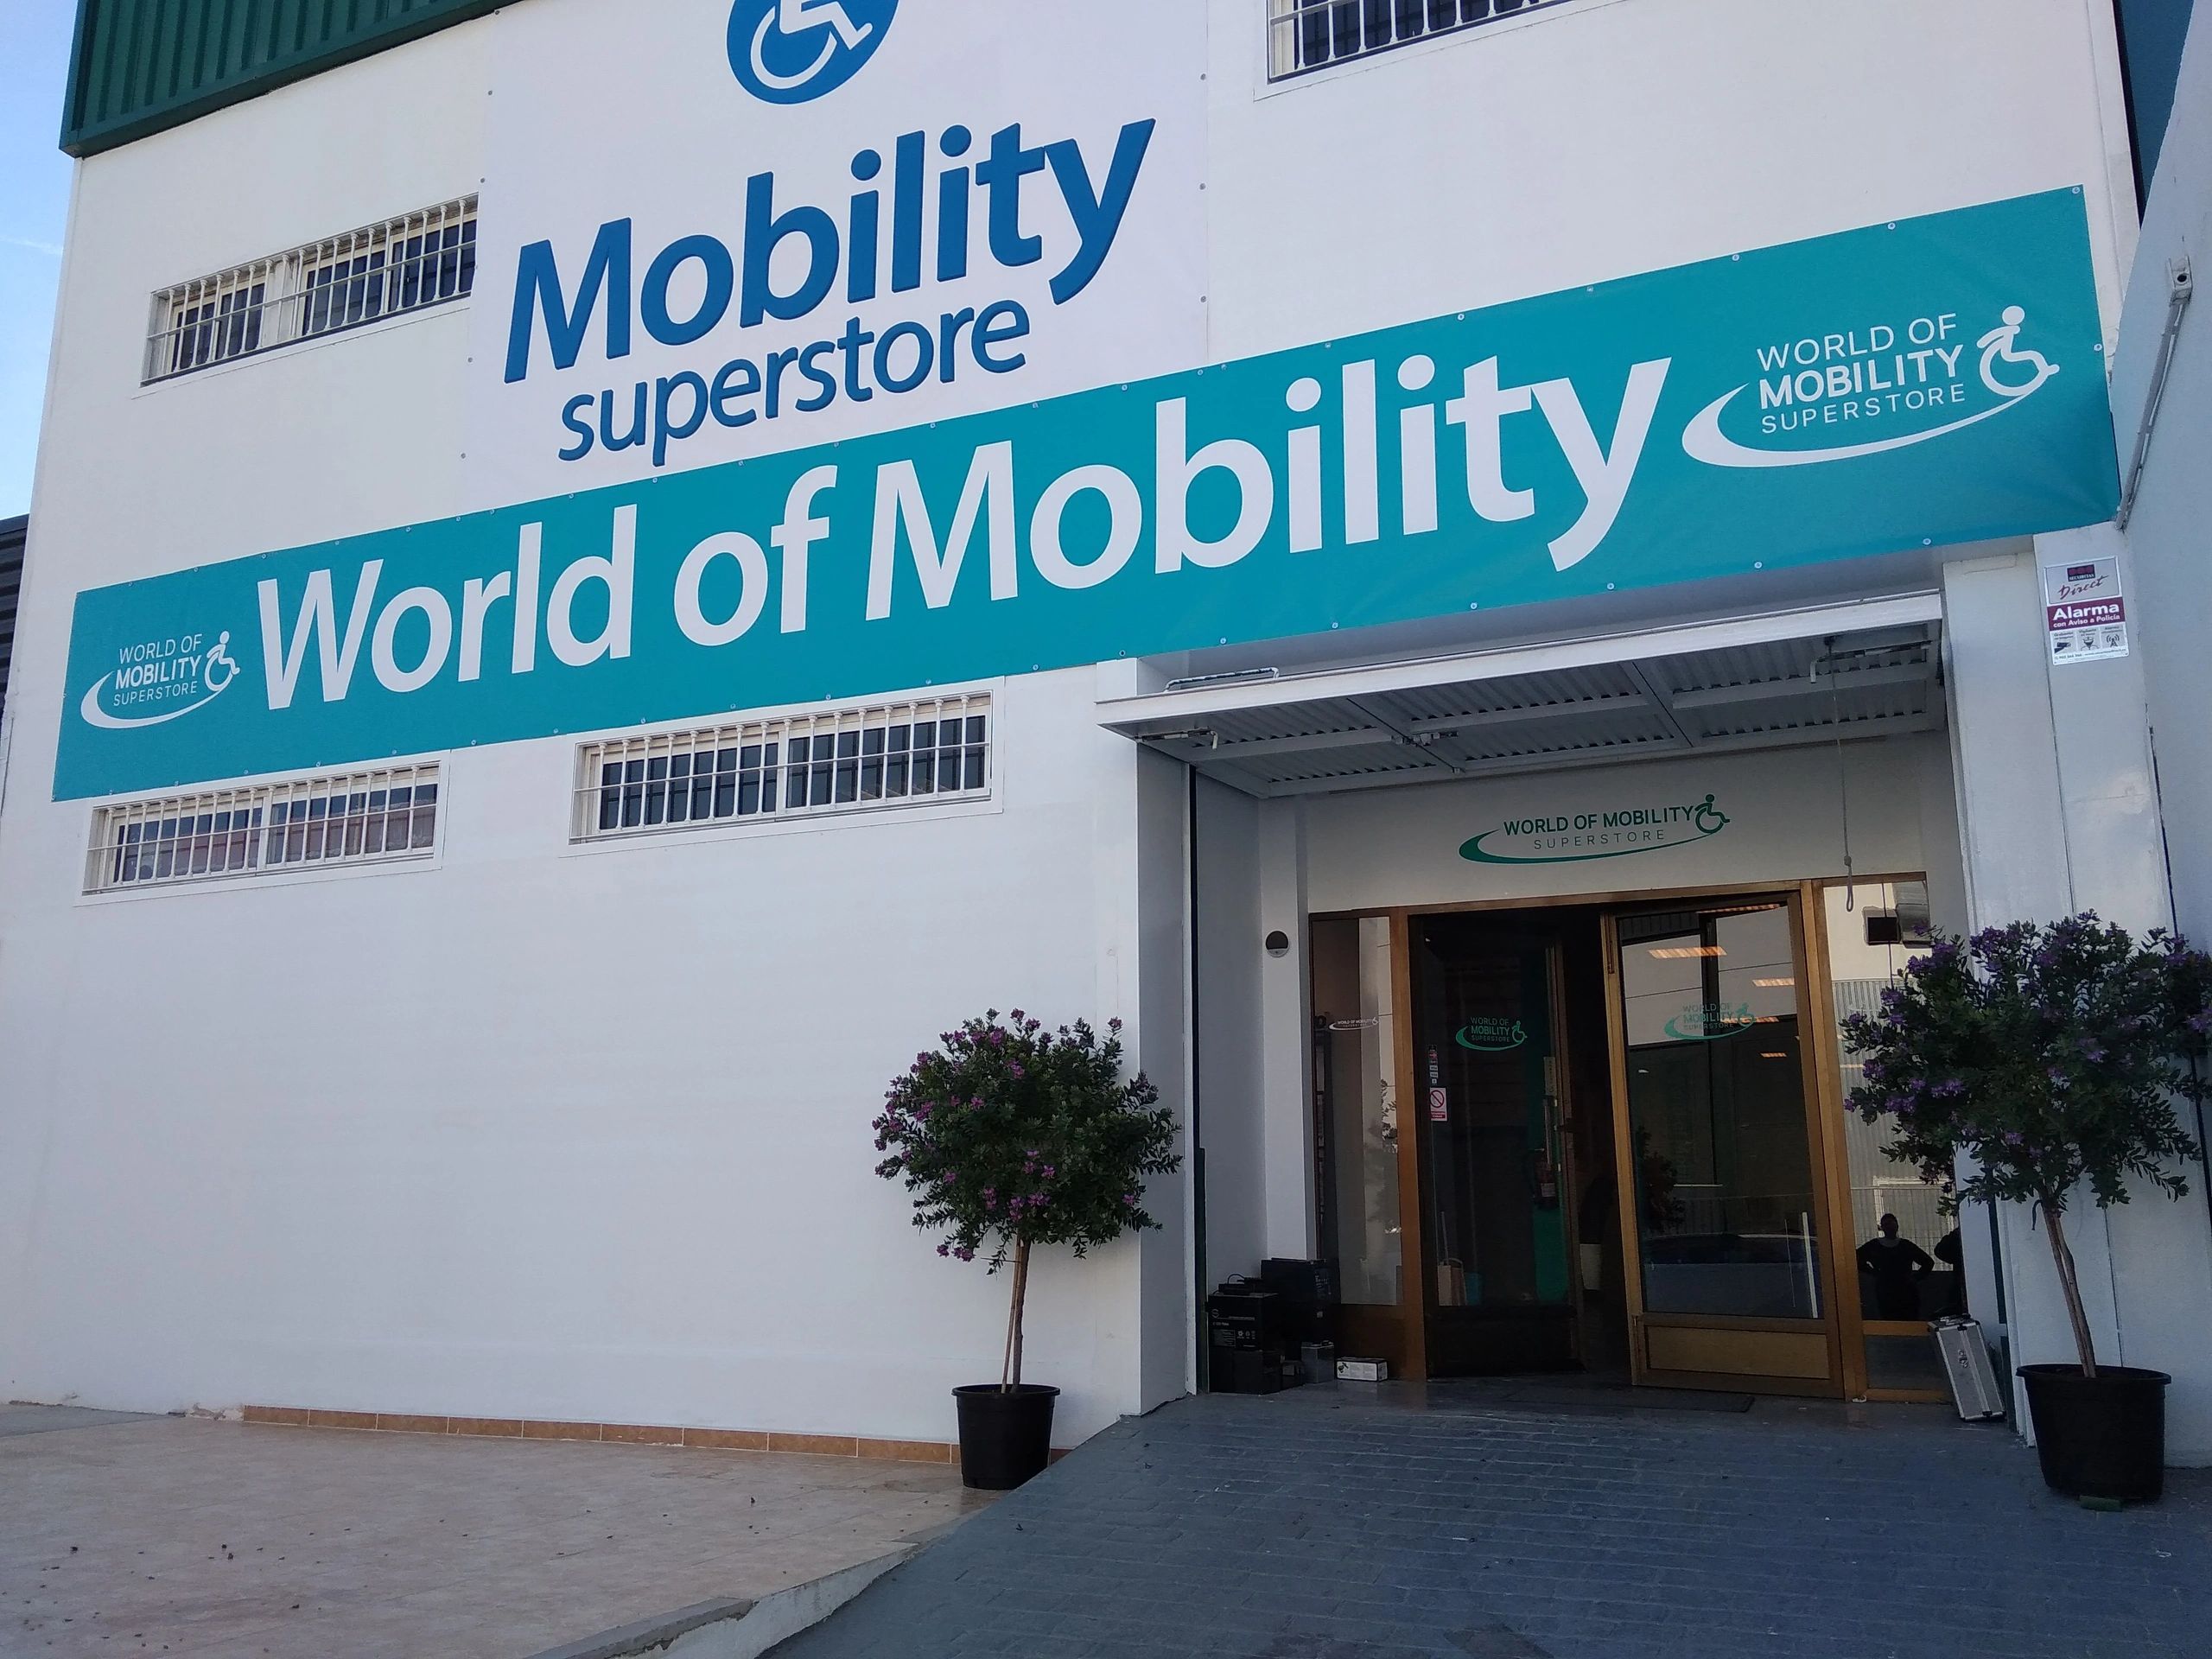 World of Mobility